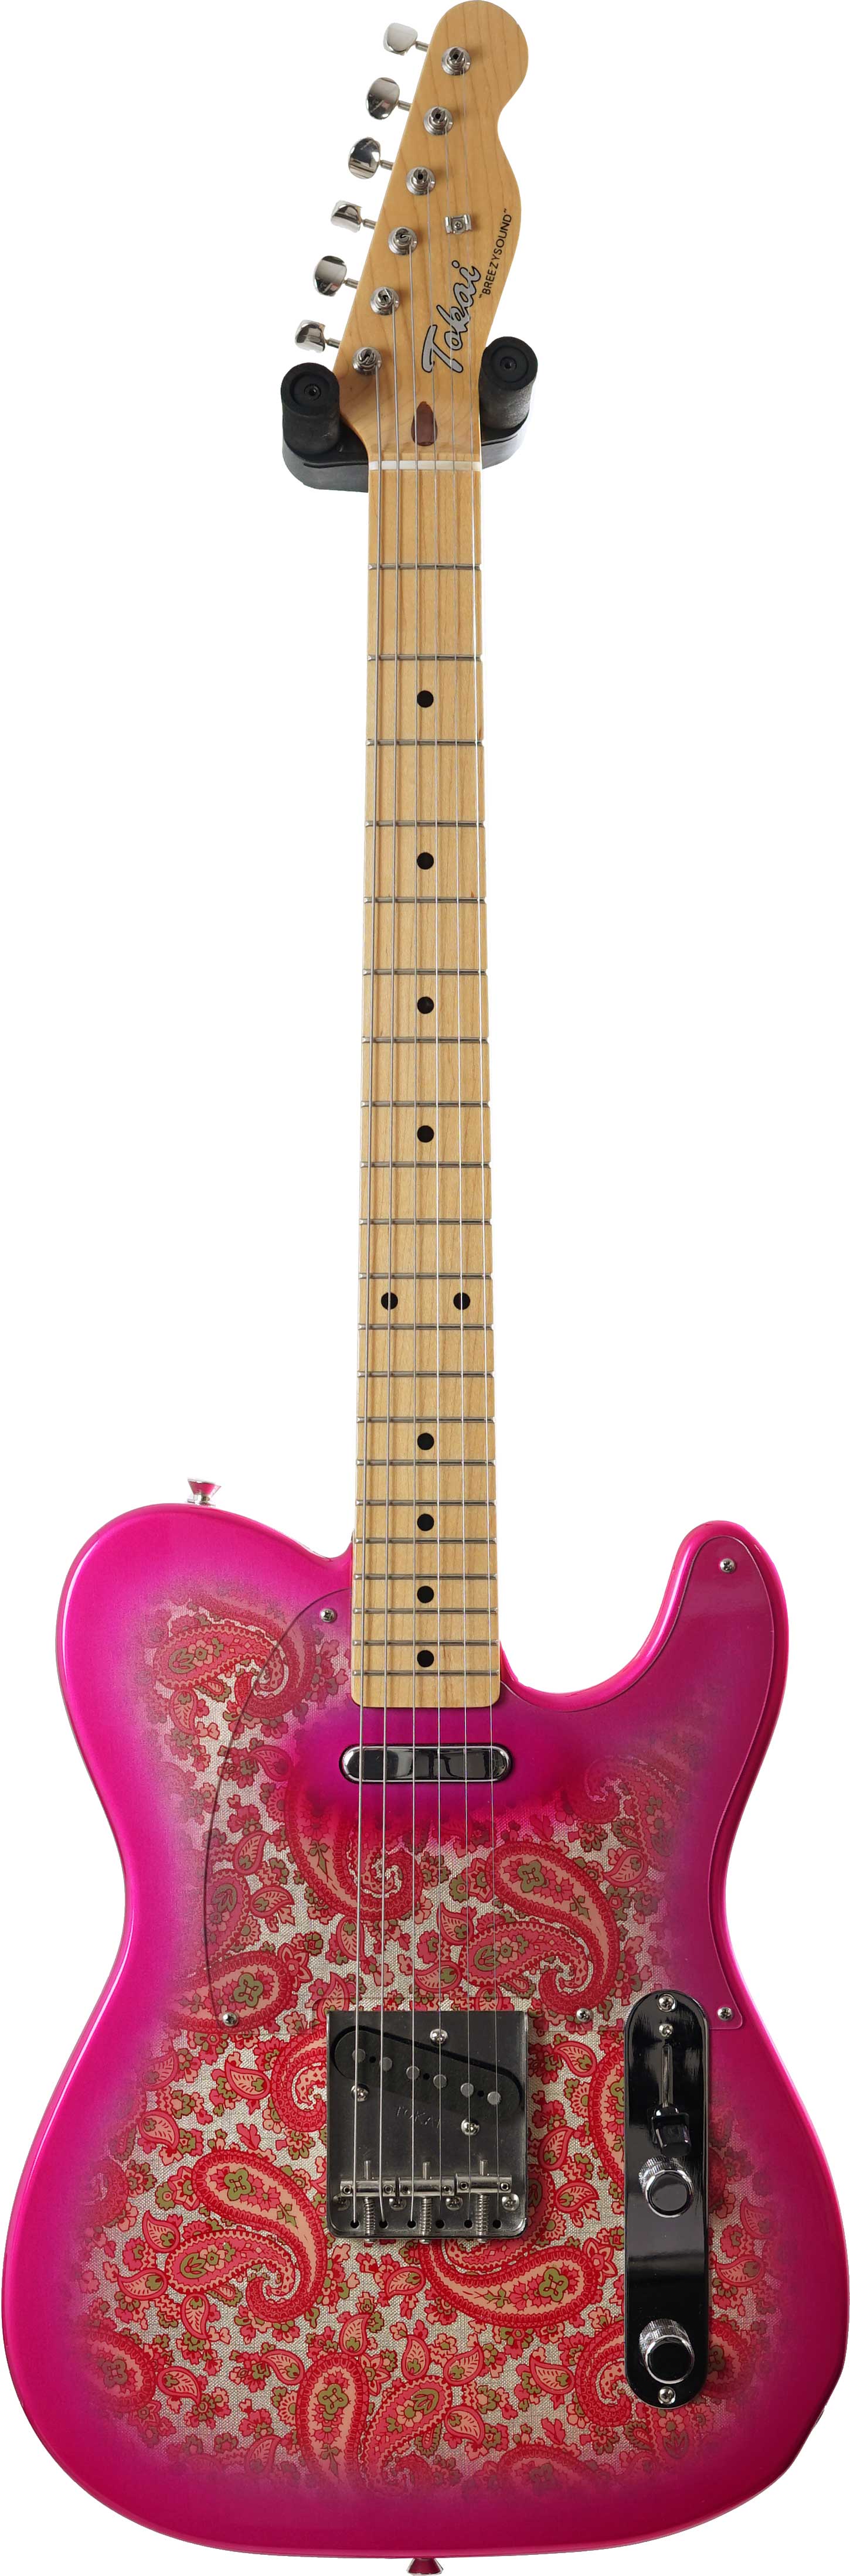 Tokai 2002 Gold Star Pink Paisley MIJ Maple Fingerboard (Pre-Owned)